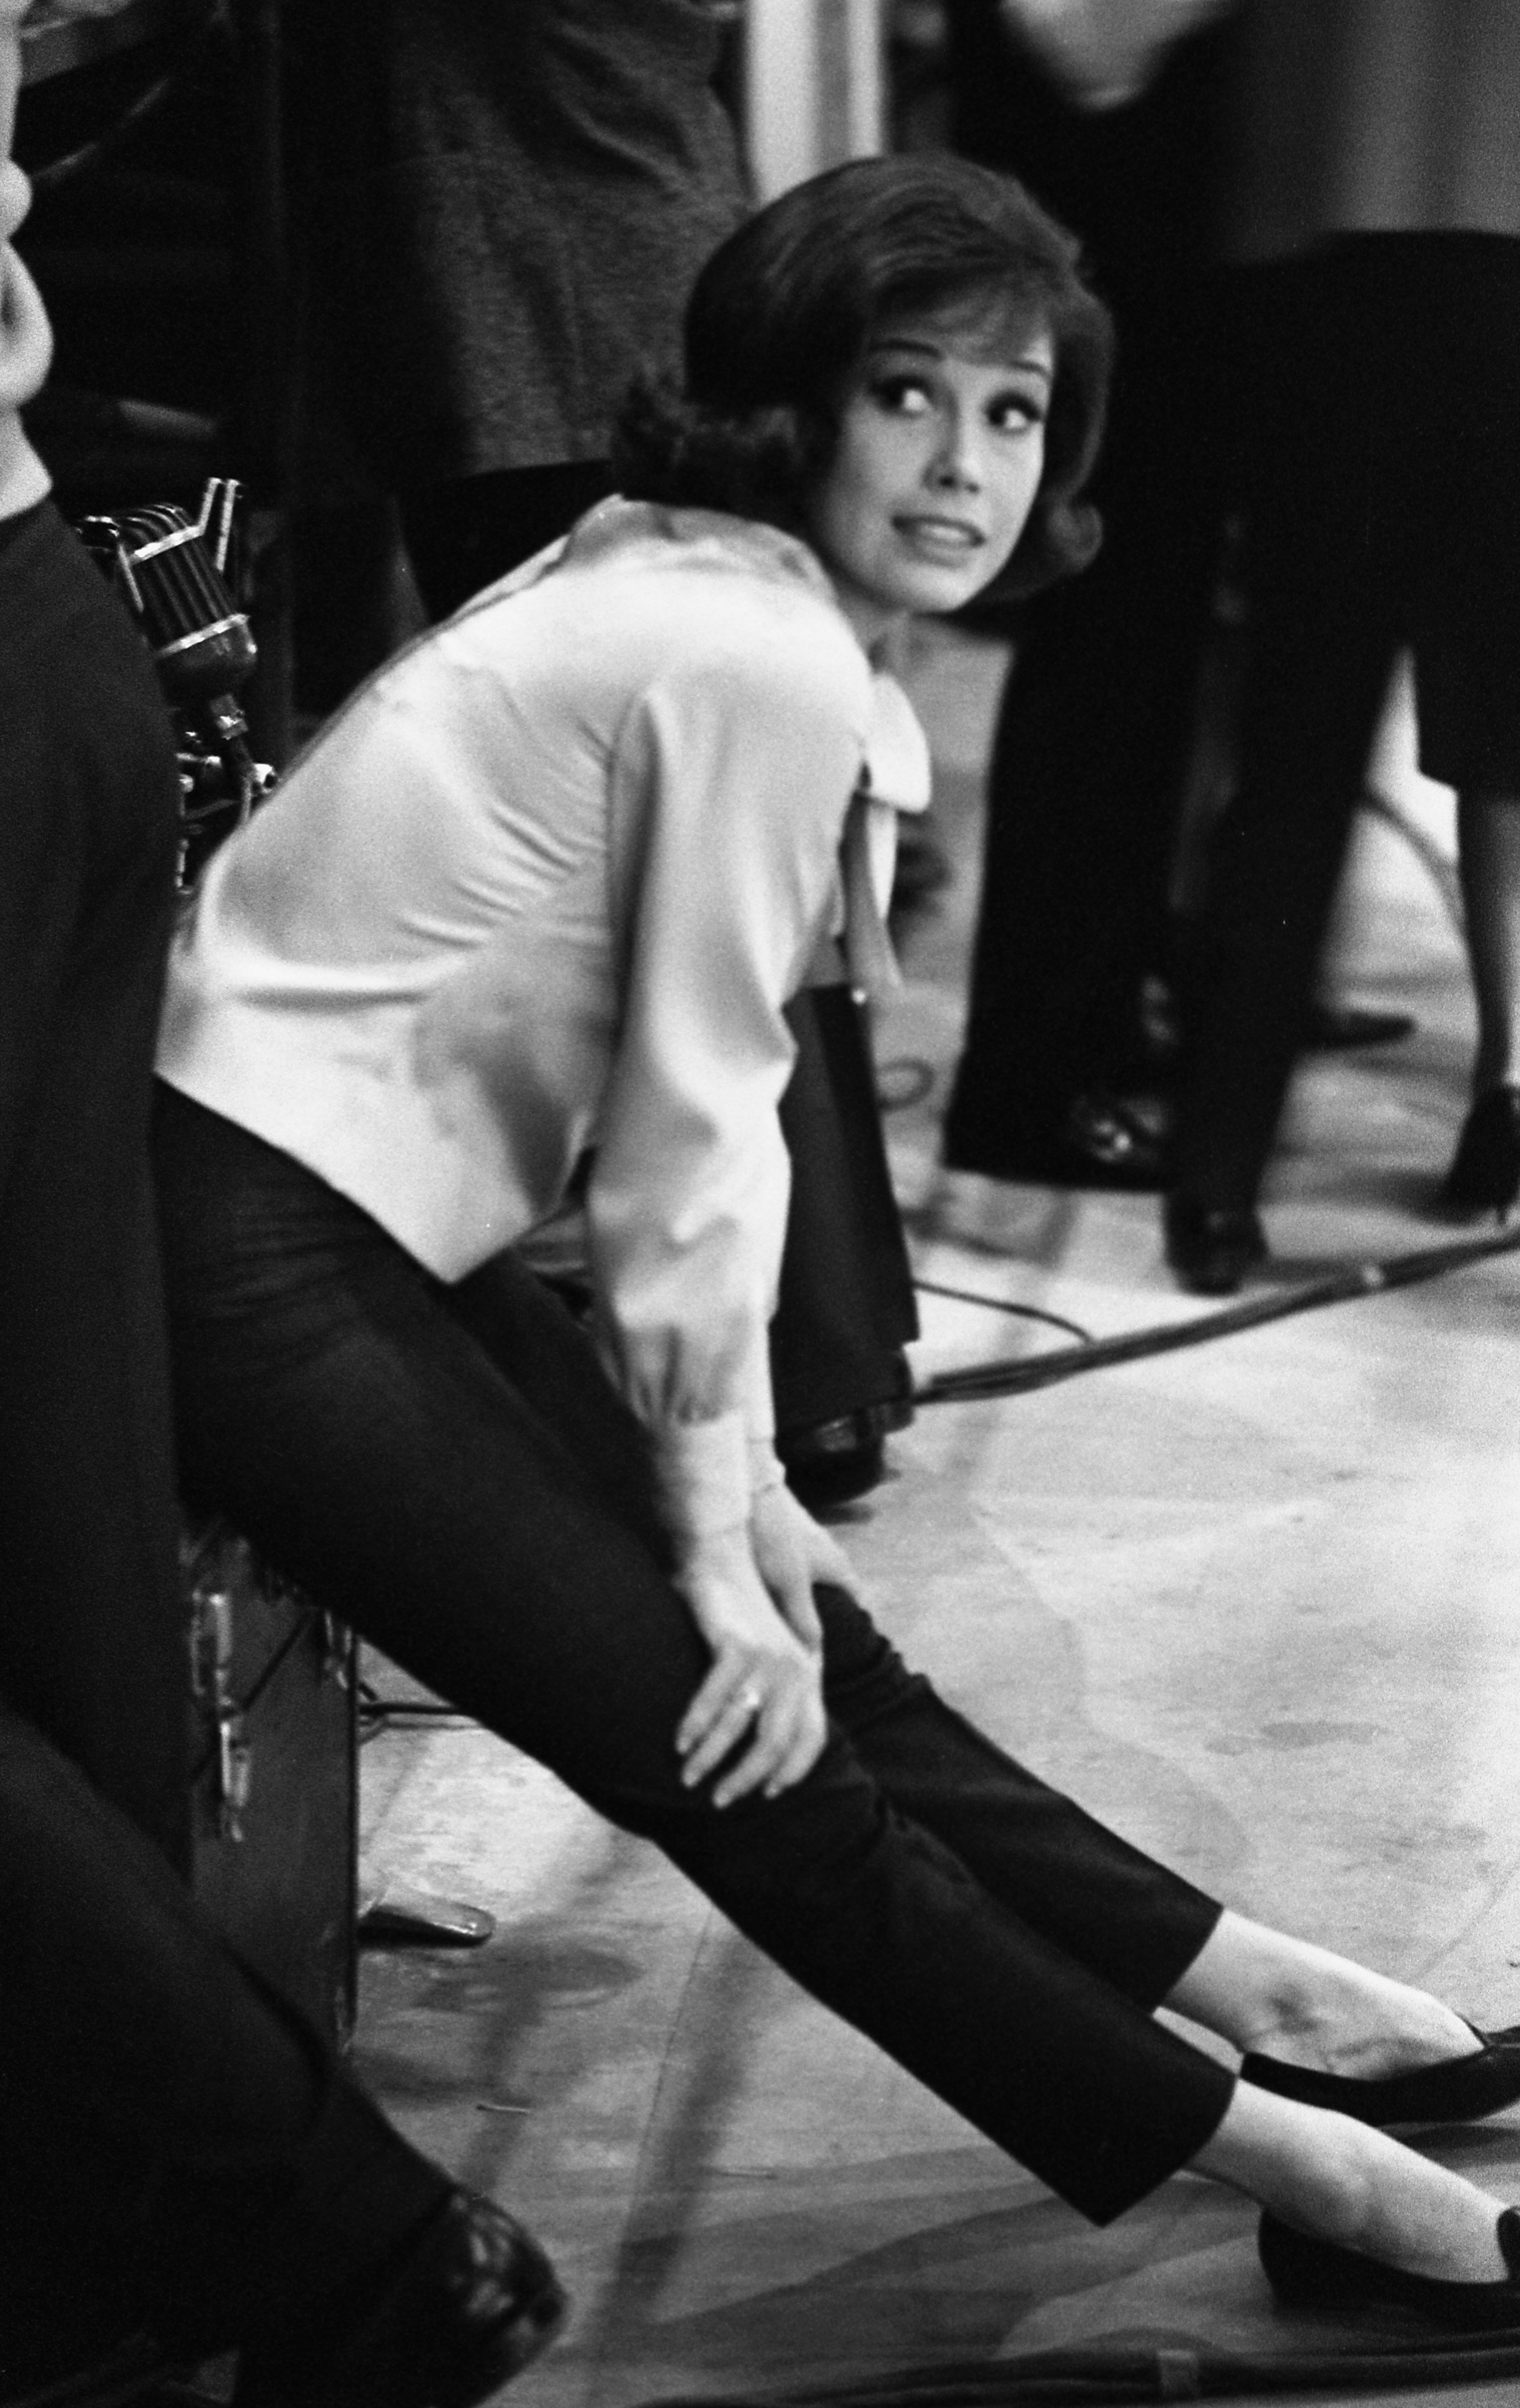 Mary Tyler Moore in rehearsal for The Dick Van Dyke Show on December 2, 1963